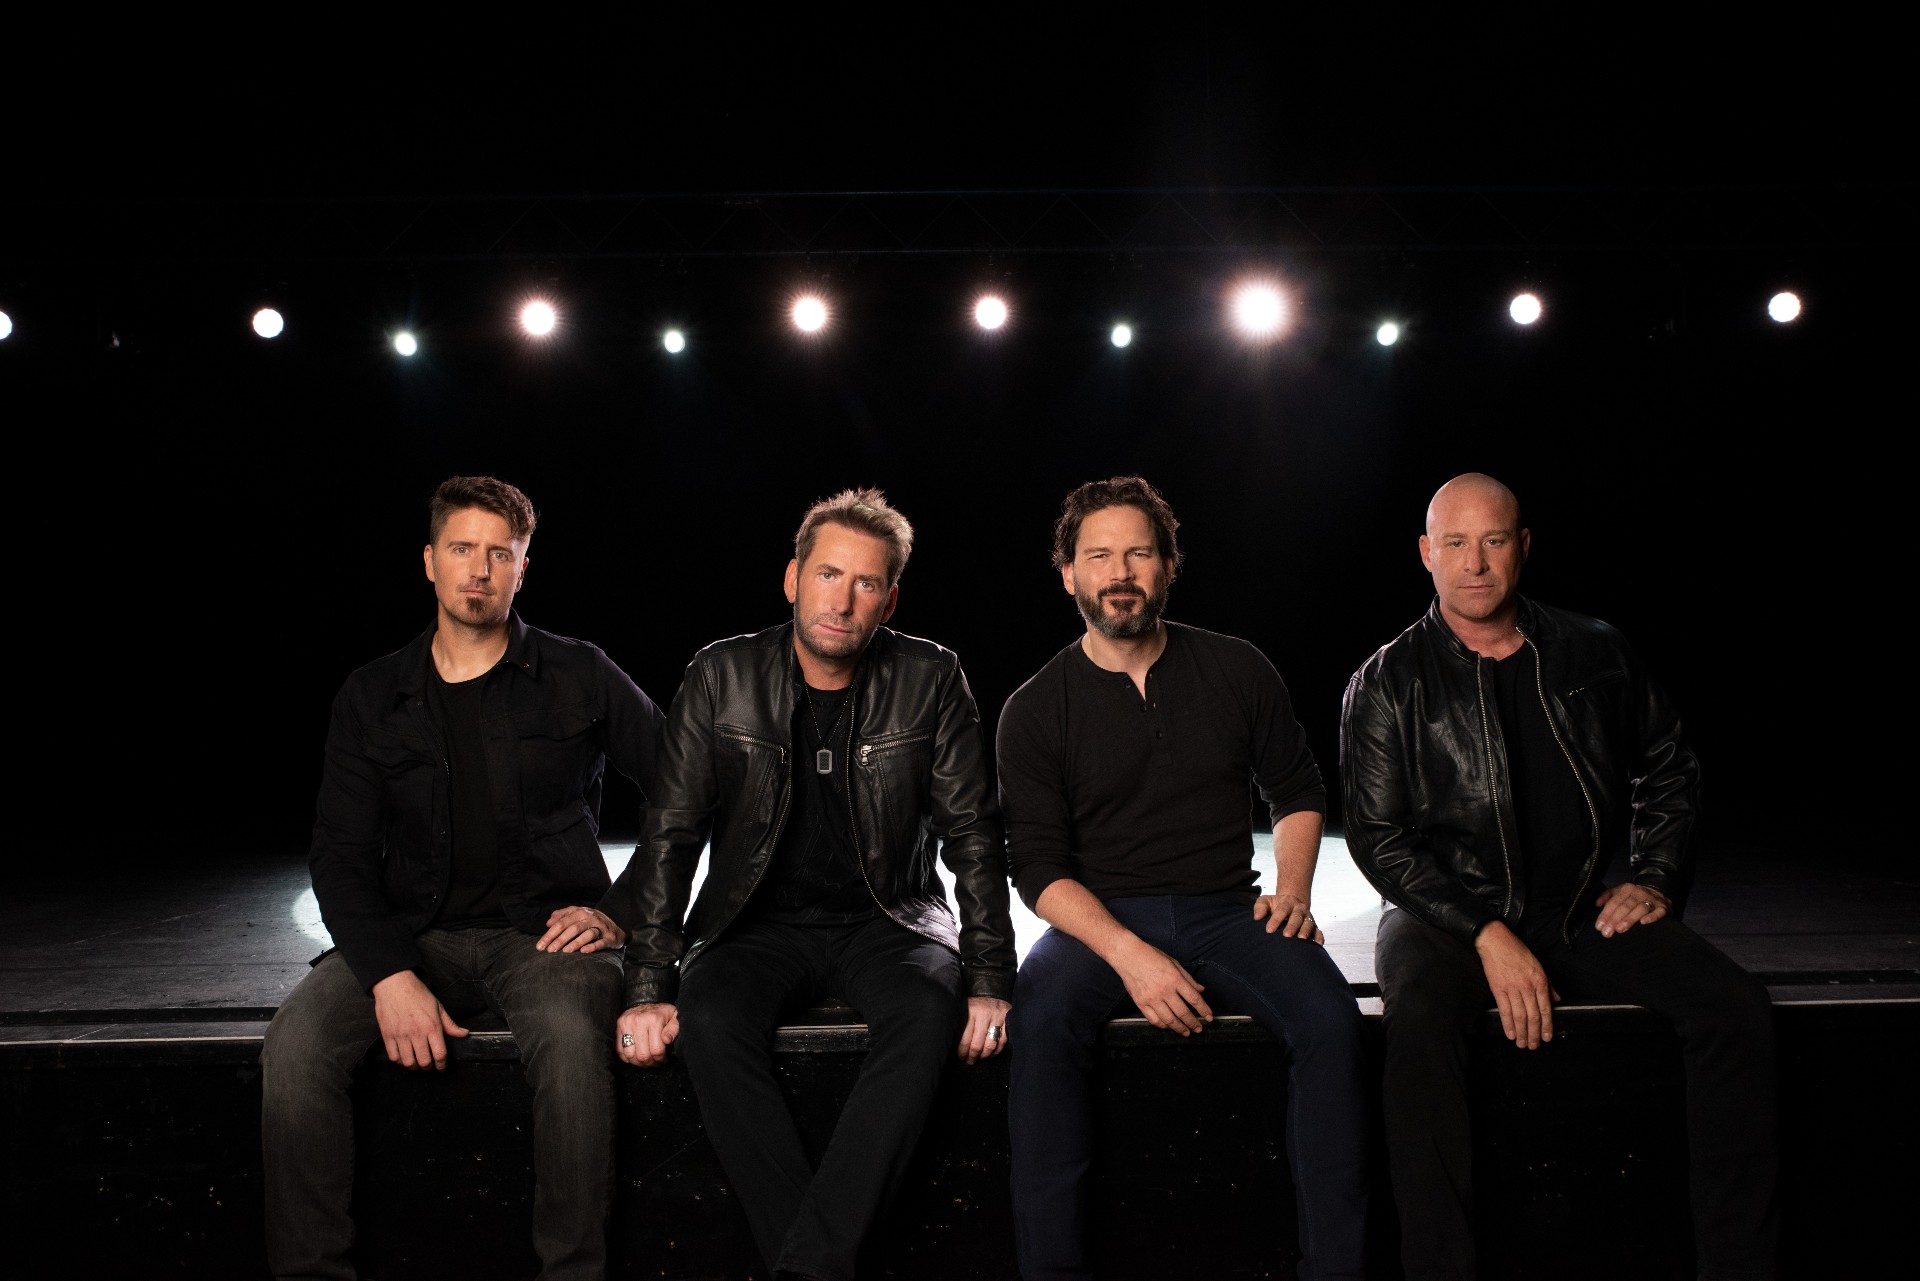 Nickelback Helps Ryan Reynolds Thank Fans for ‘Spirited’ Success With ‘Unredeemable’ Performance [VIDEO]